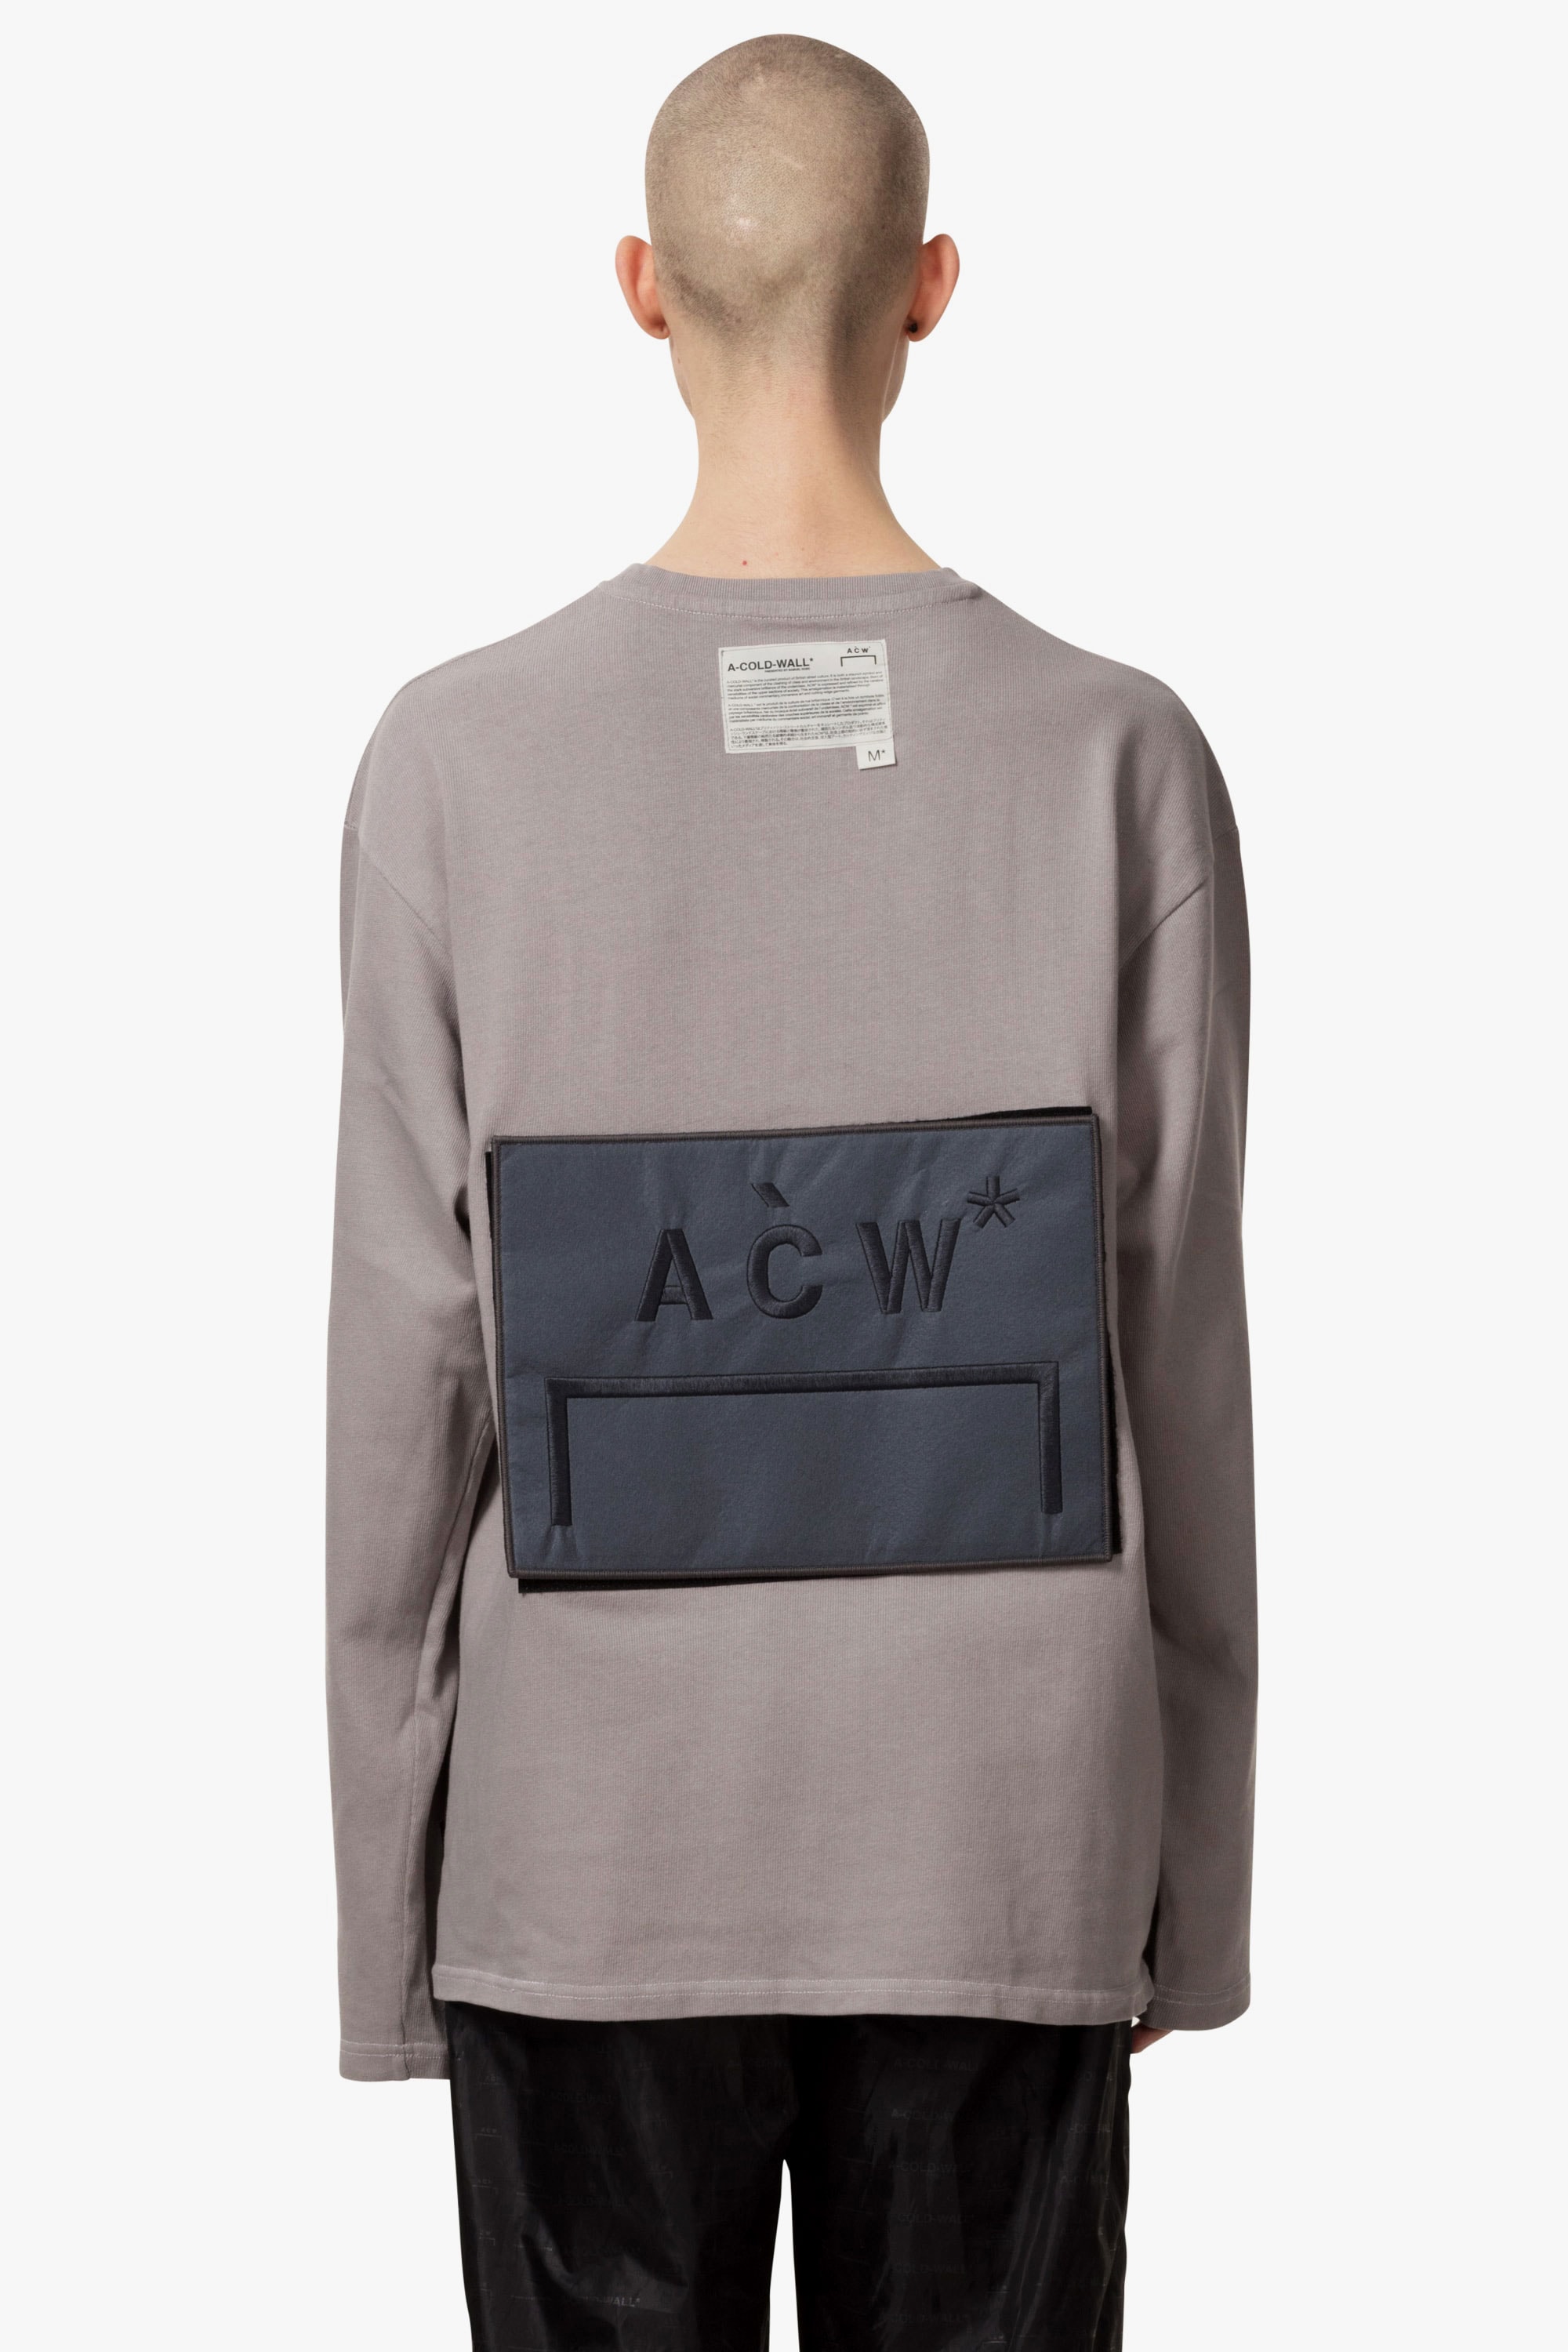 A-COLD-WALL* 2018 New Releases Shirts Bags Boot Streetwear London Fashion Week Samuel Ross Mens designer menswear street culture architectural minimalism abstract graphics Tomorrow London Holdings Ltd